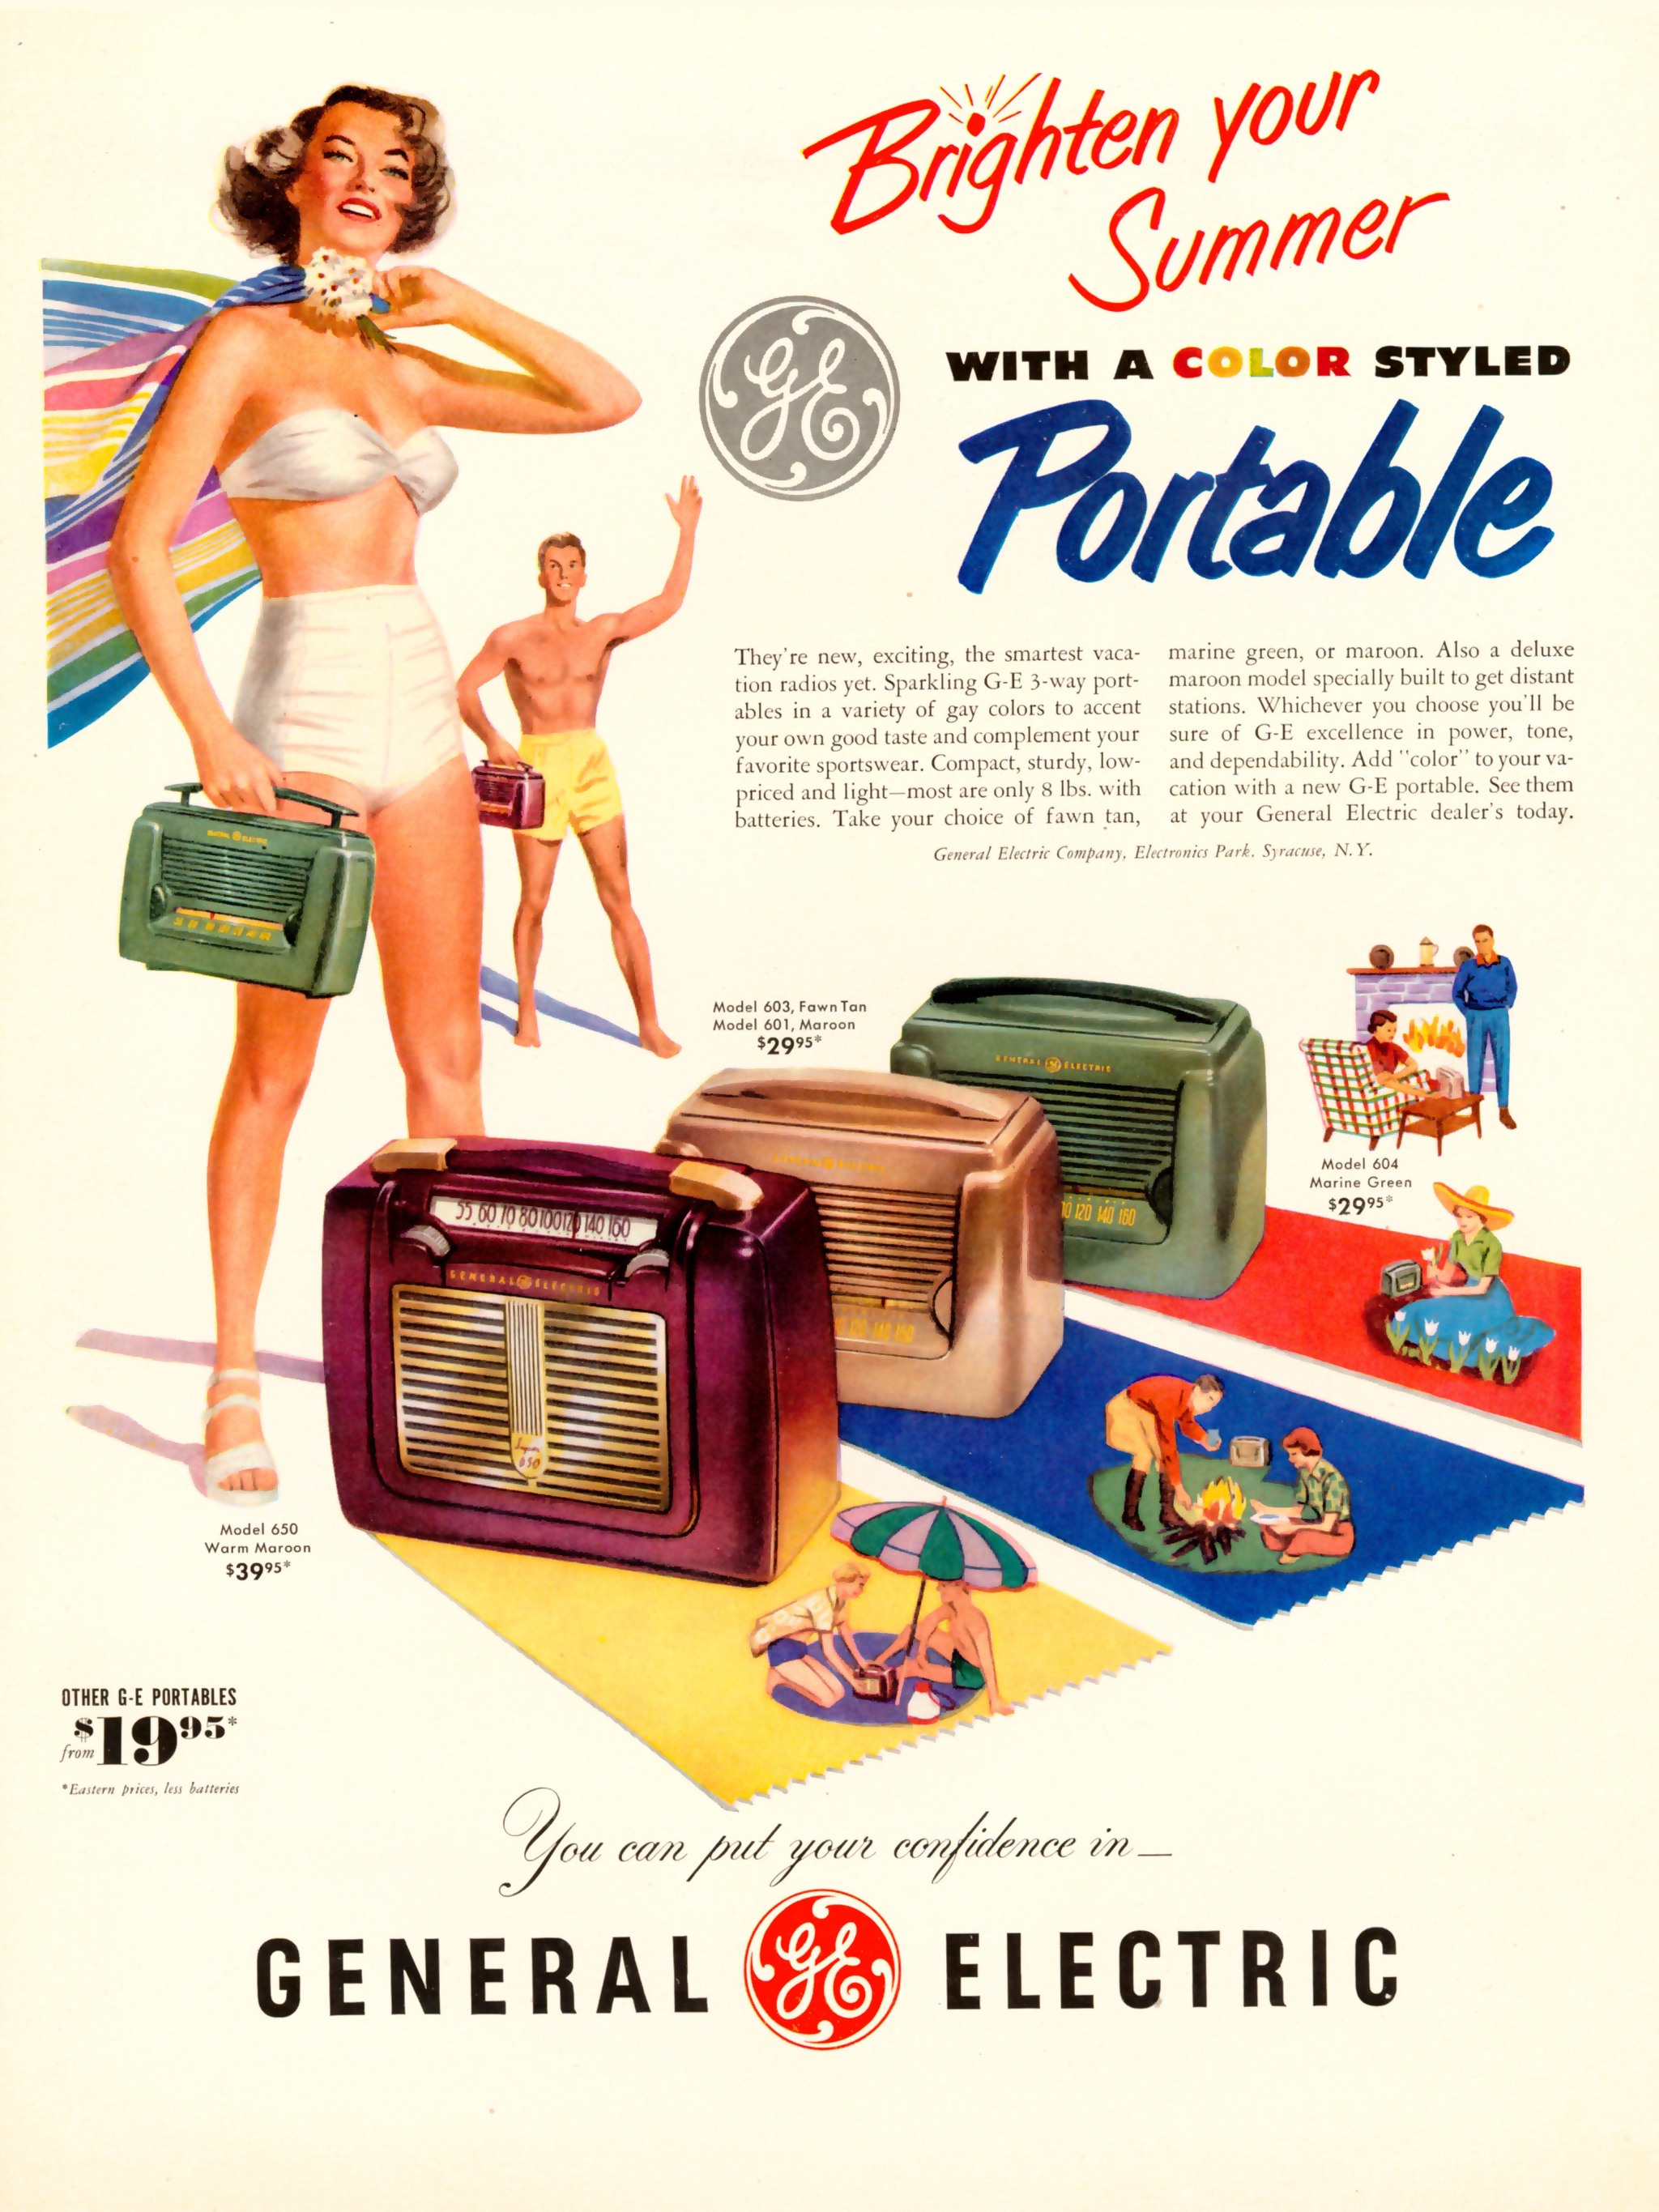 General Electric - published in Collier's - May 20, 1950